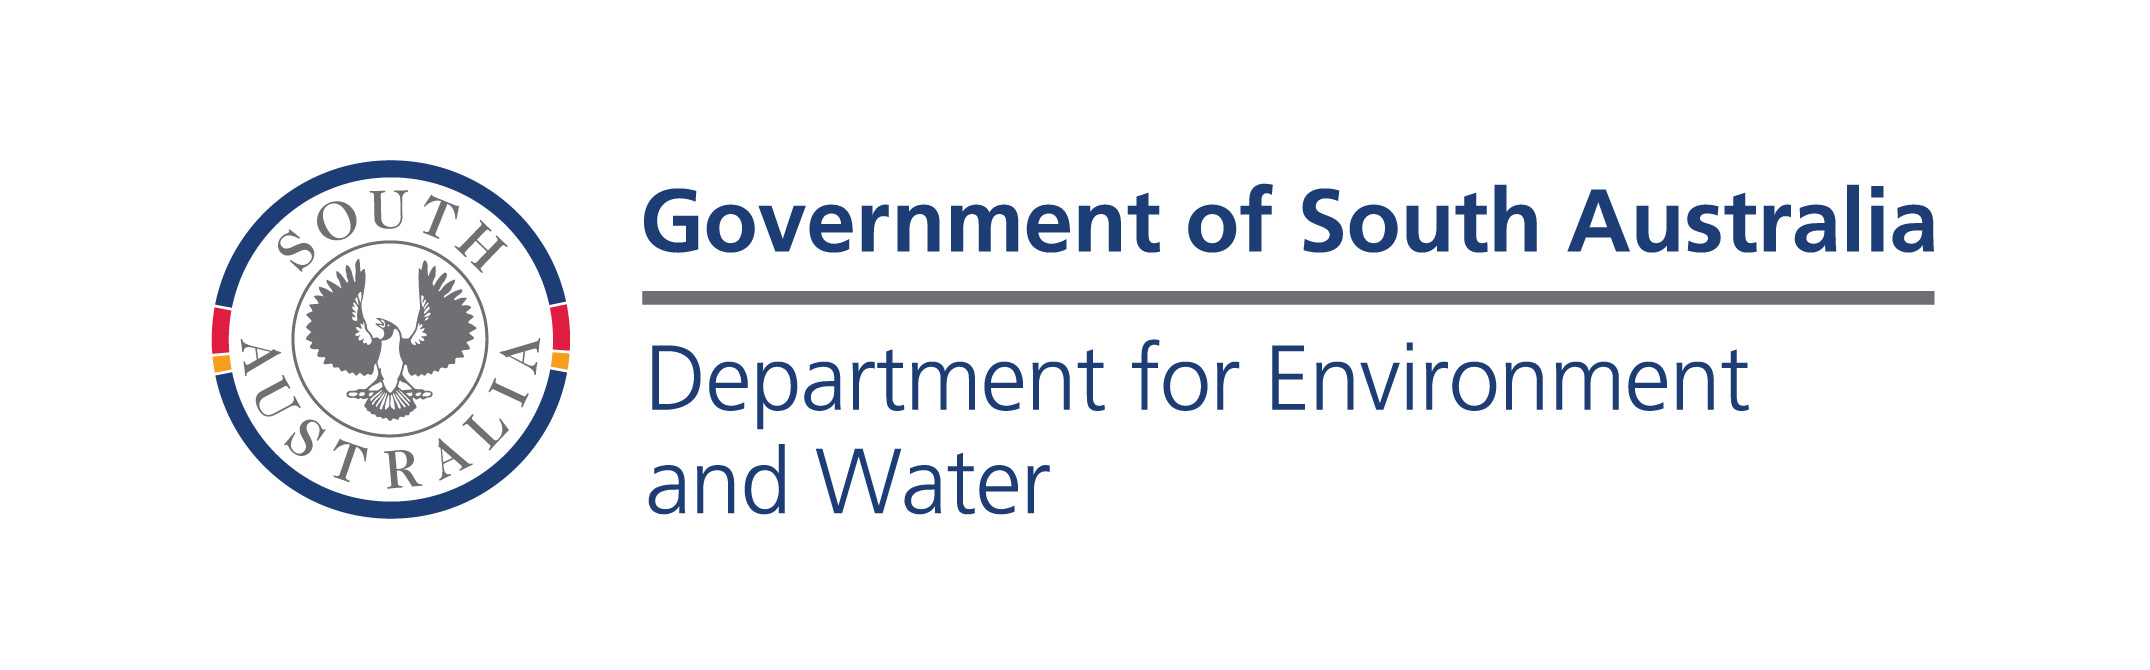 Department for Environment and Water